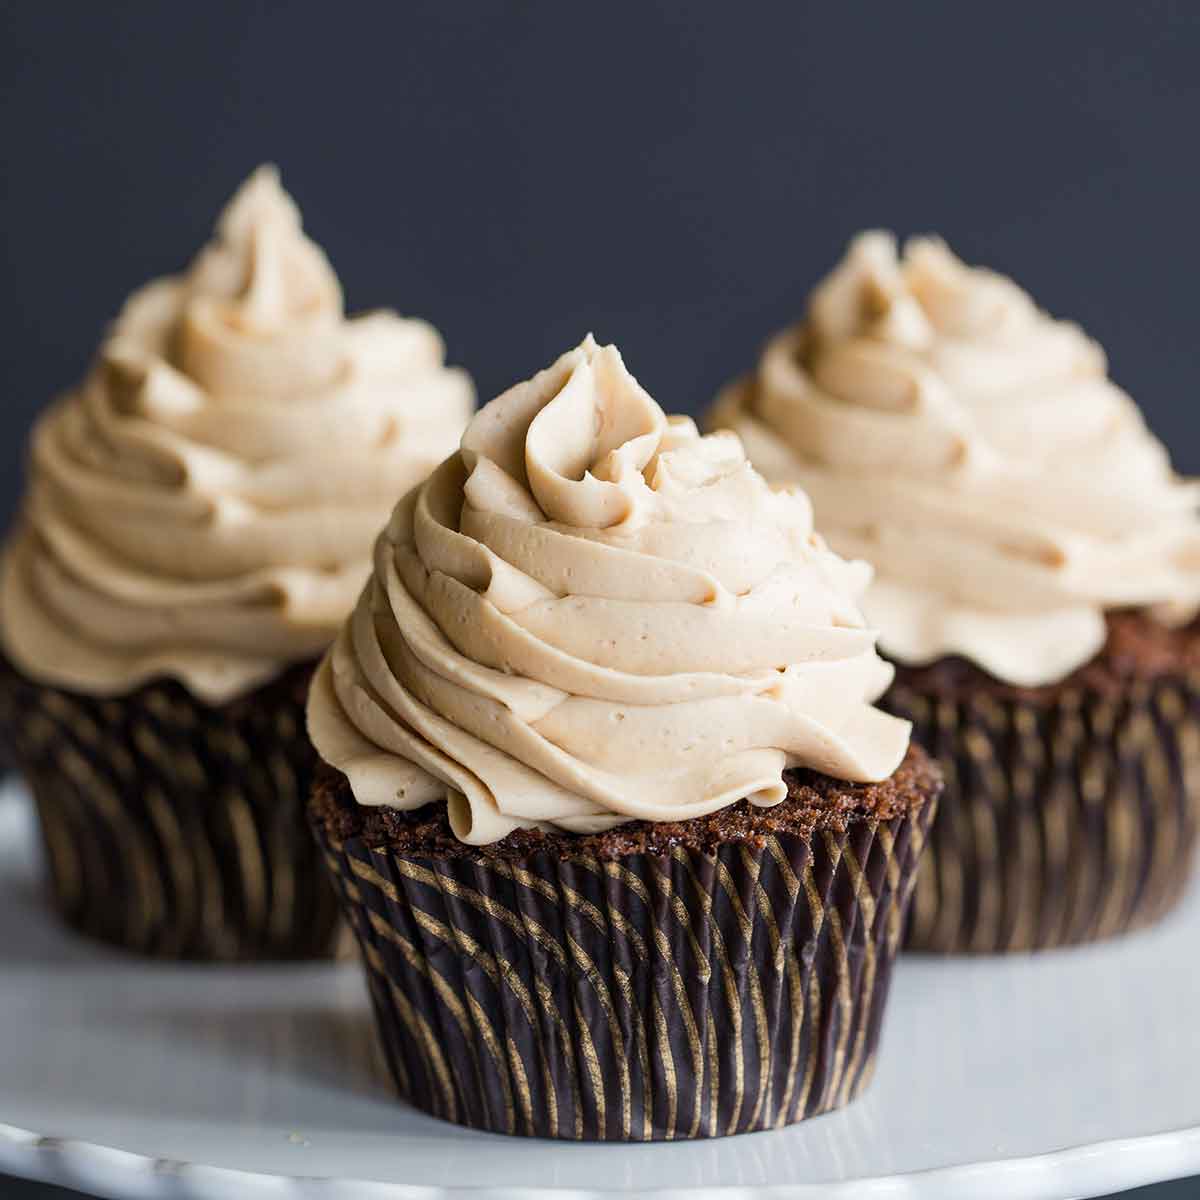 Mocha cupcakes with espresso frosting in dark paper liners on a white serving plate.